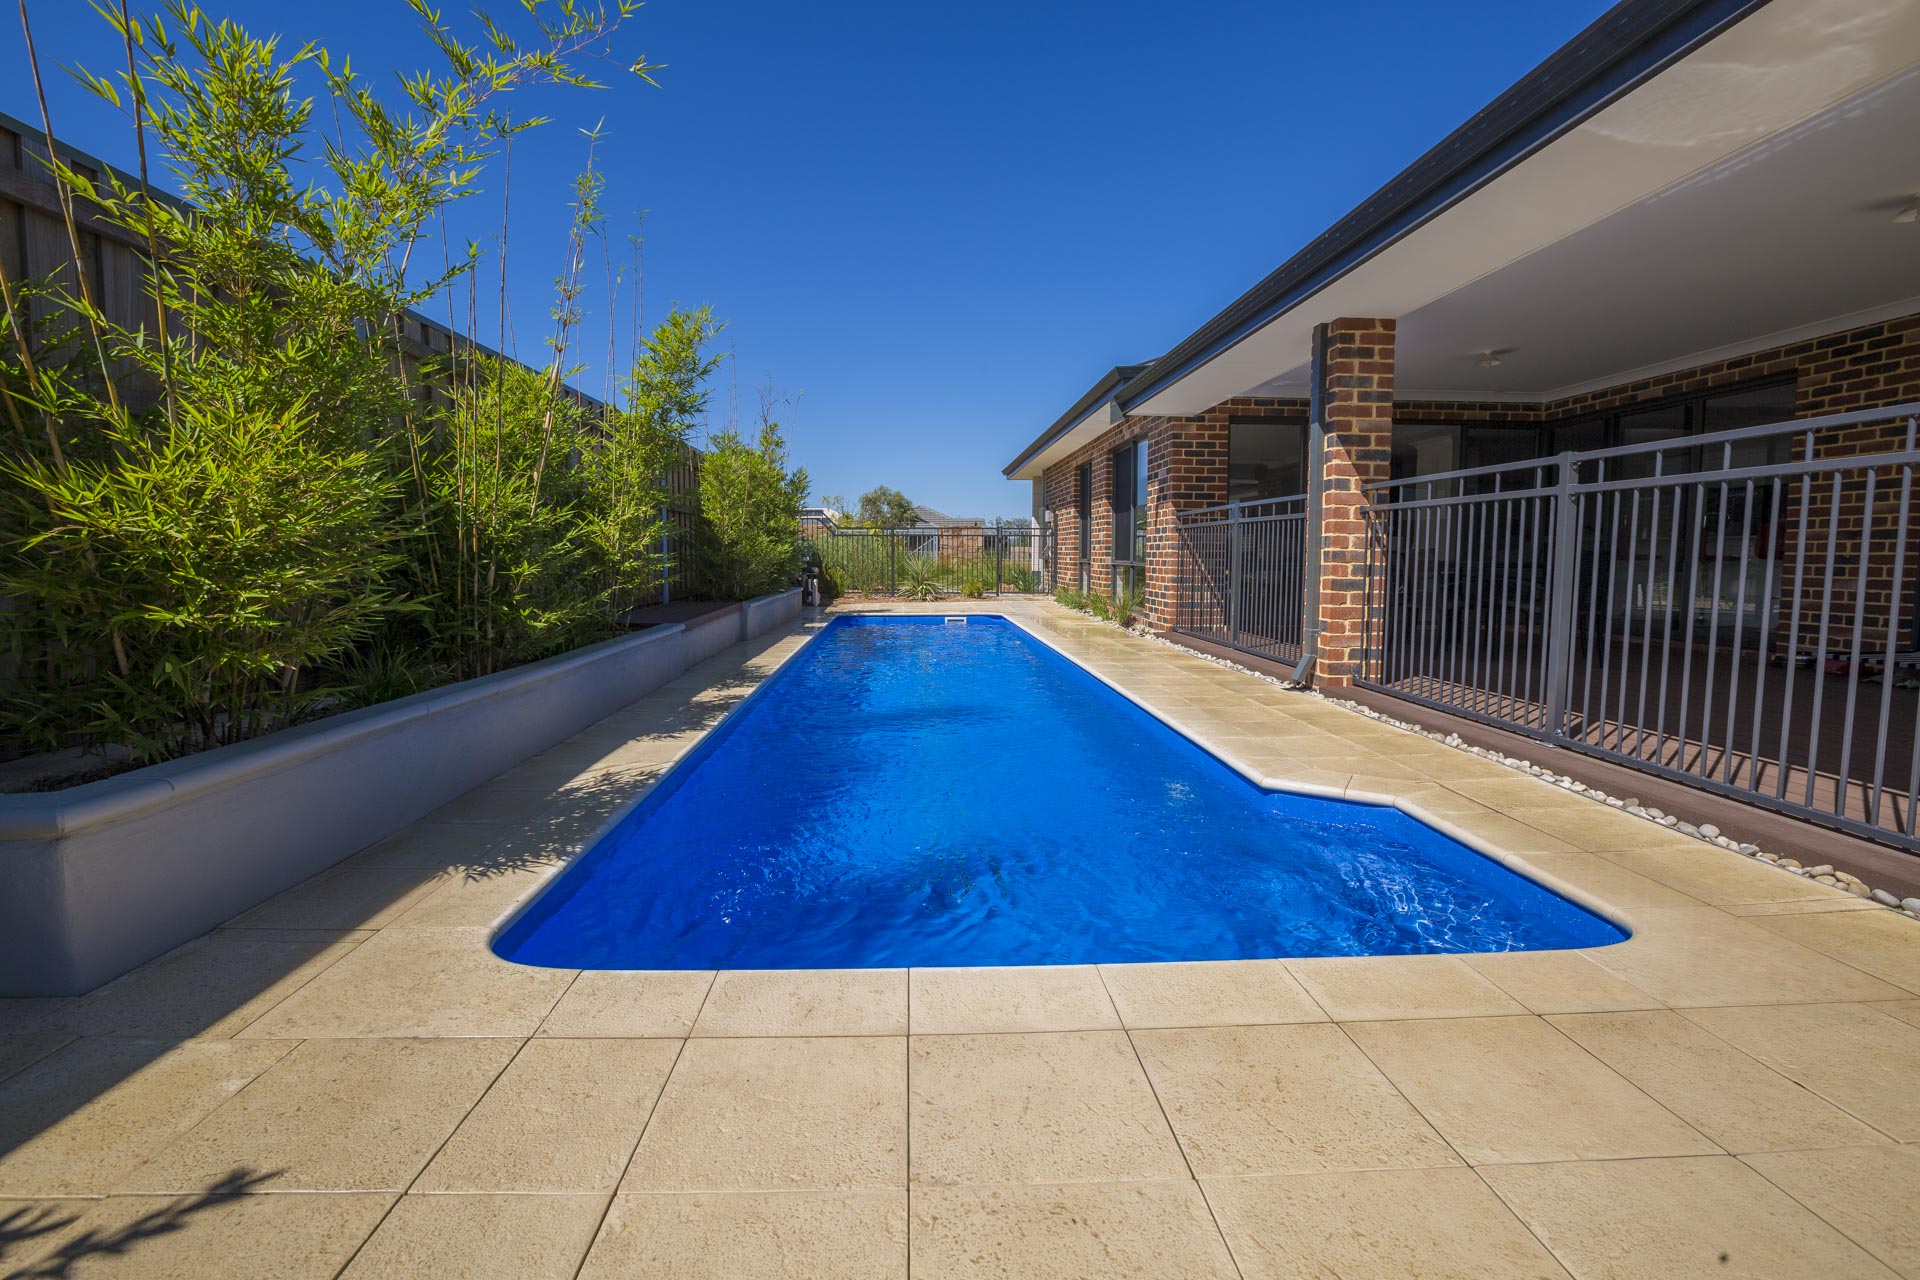 Another beautiful Freedom Lap Pool we installed at The Vines in Western Australia